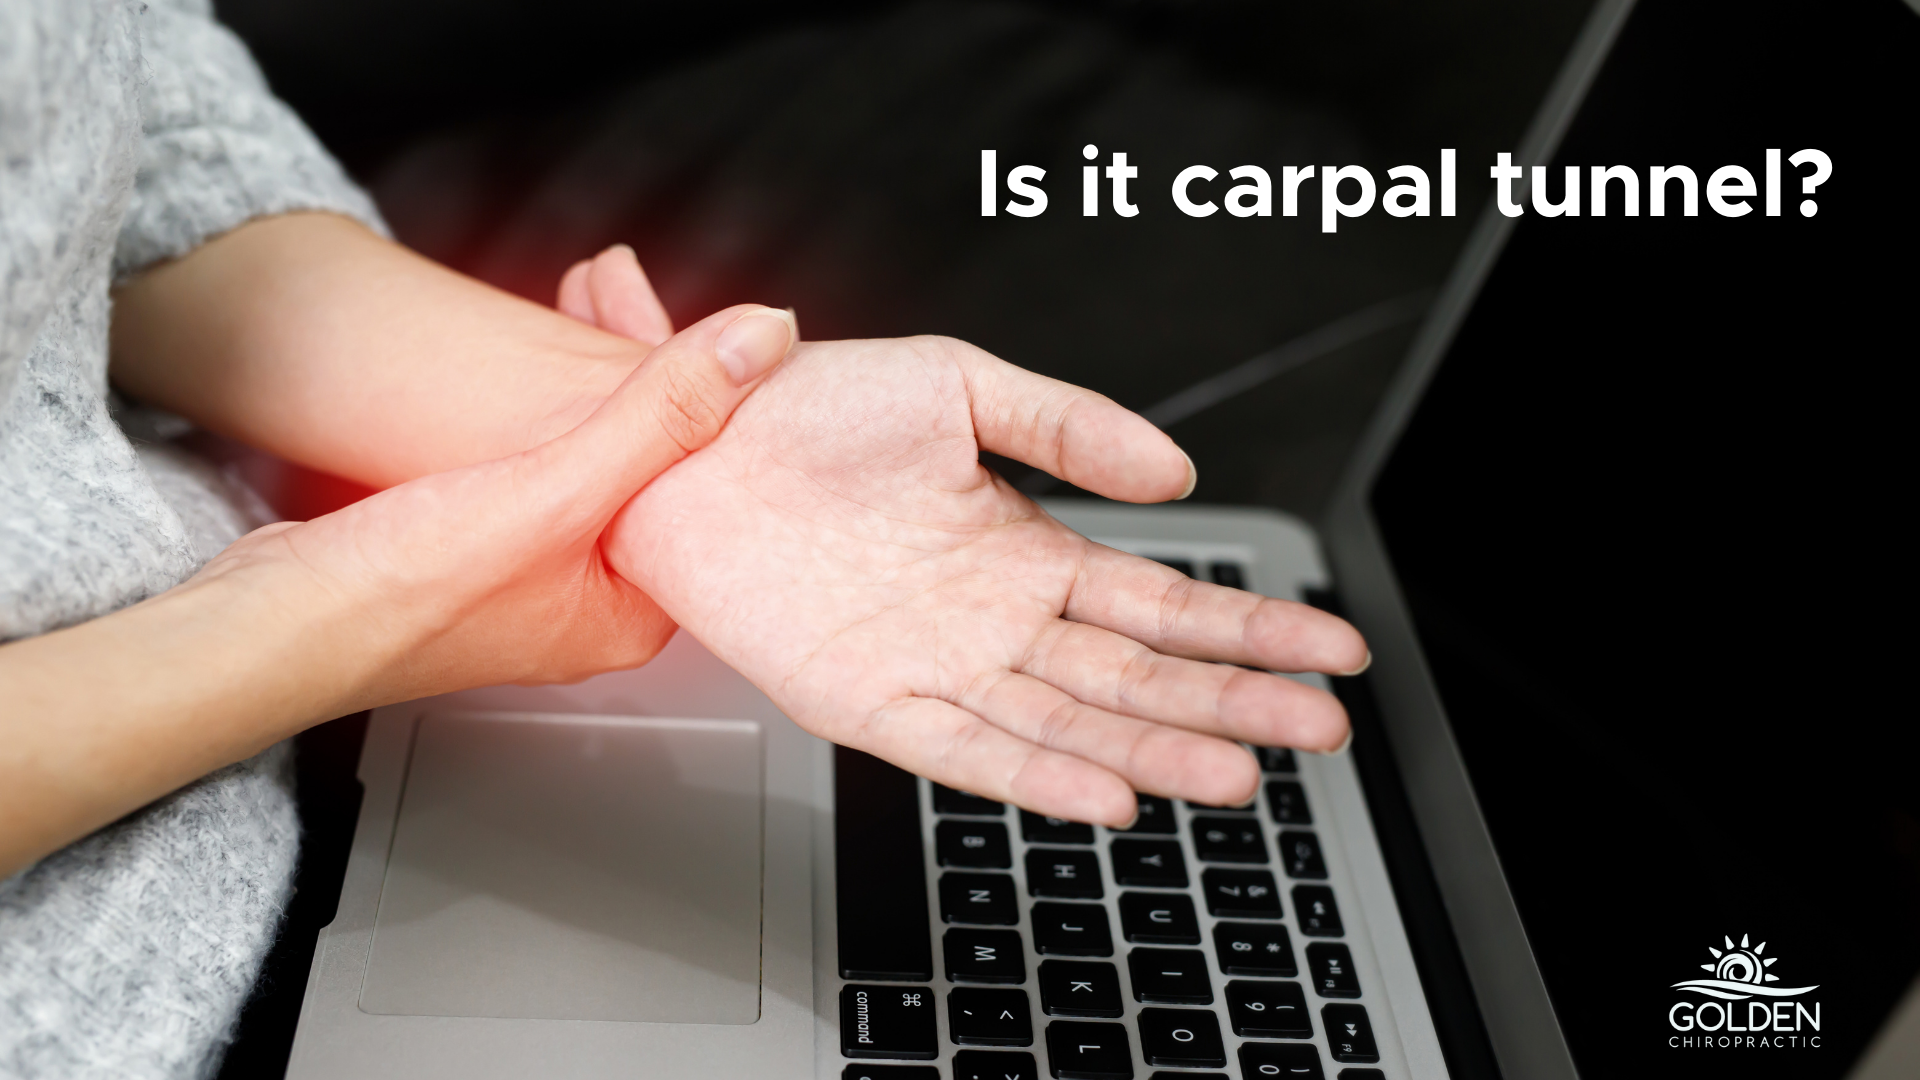 woman's hand gripping the wrist of her other hand in front of a laptop keyboard